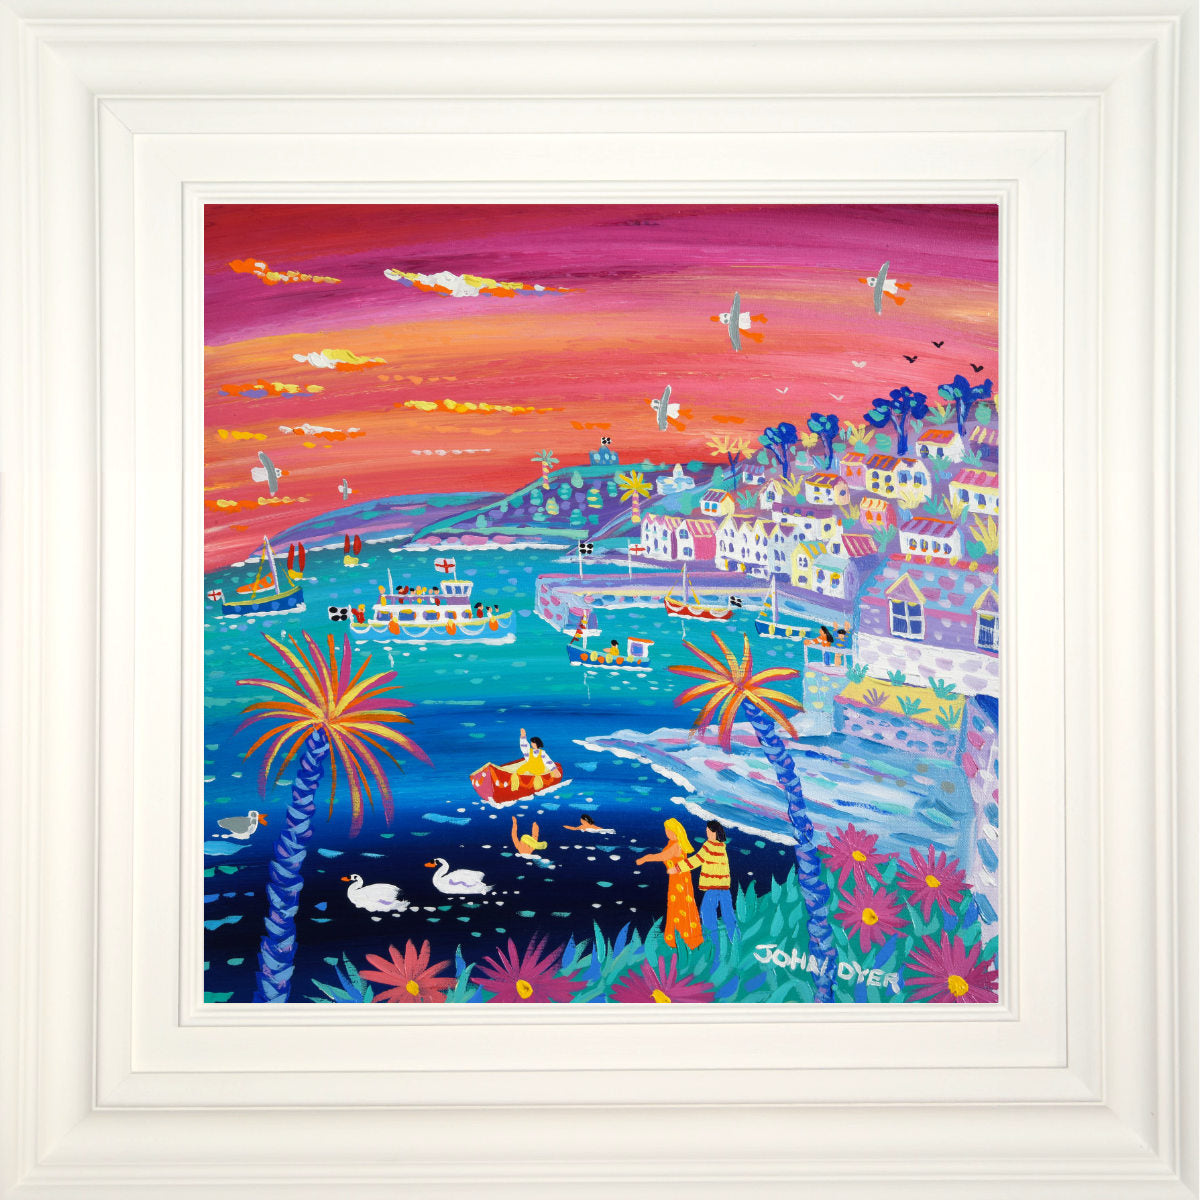 &#39;Romantic Sunset, St Mawes&#39;, 18x18 inches acrylic on canvas. Cornwall Painting by Cornish Artist John Dyer. Cornish Art from our Cornwall Art Gallery